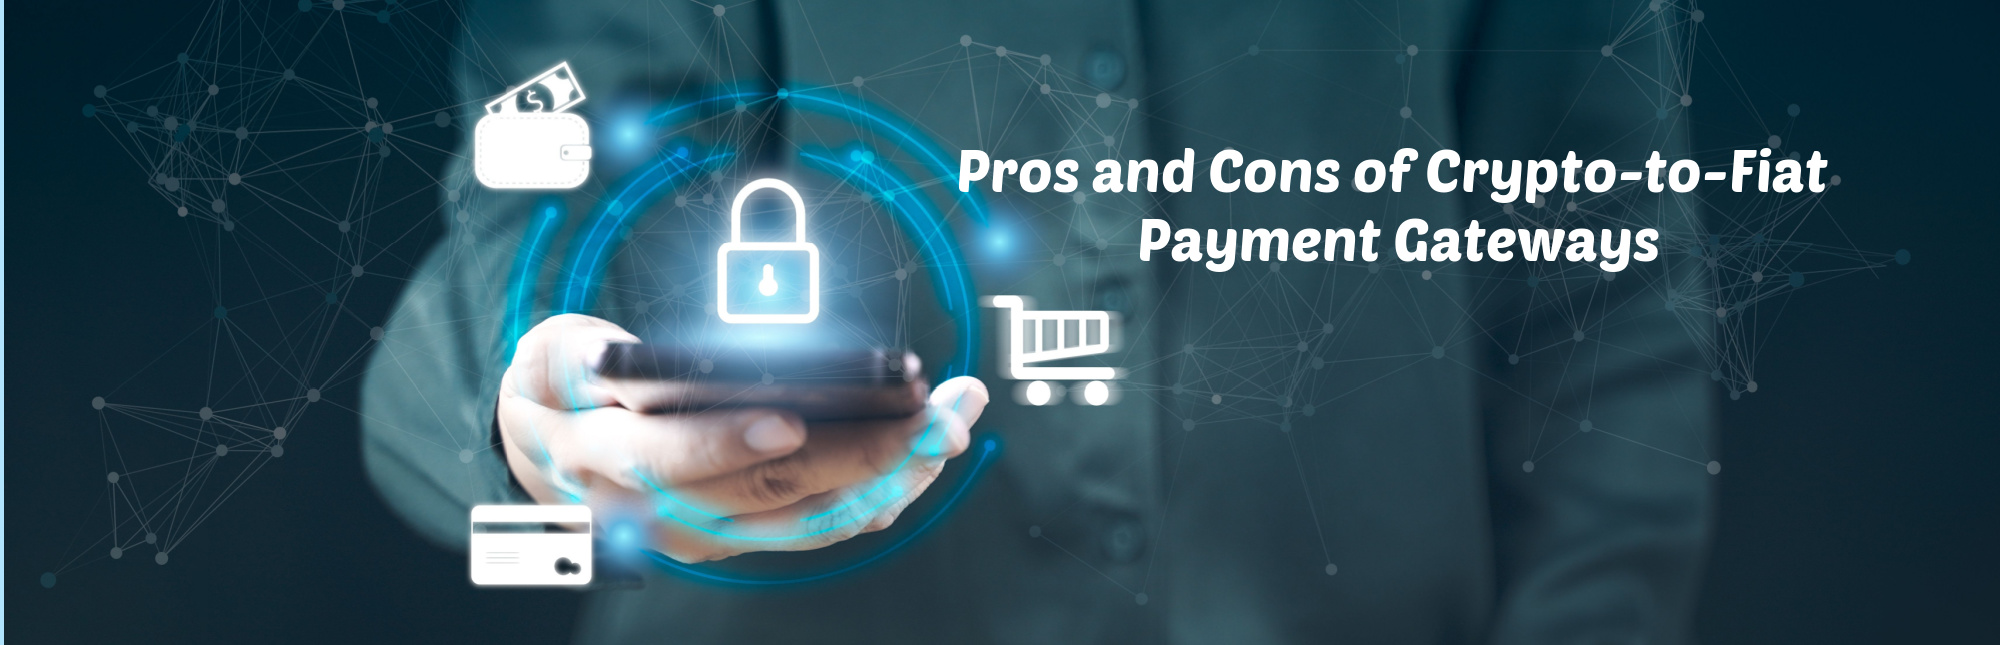 image of pros and cons of crypto to fiat payment gateways